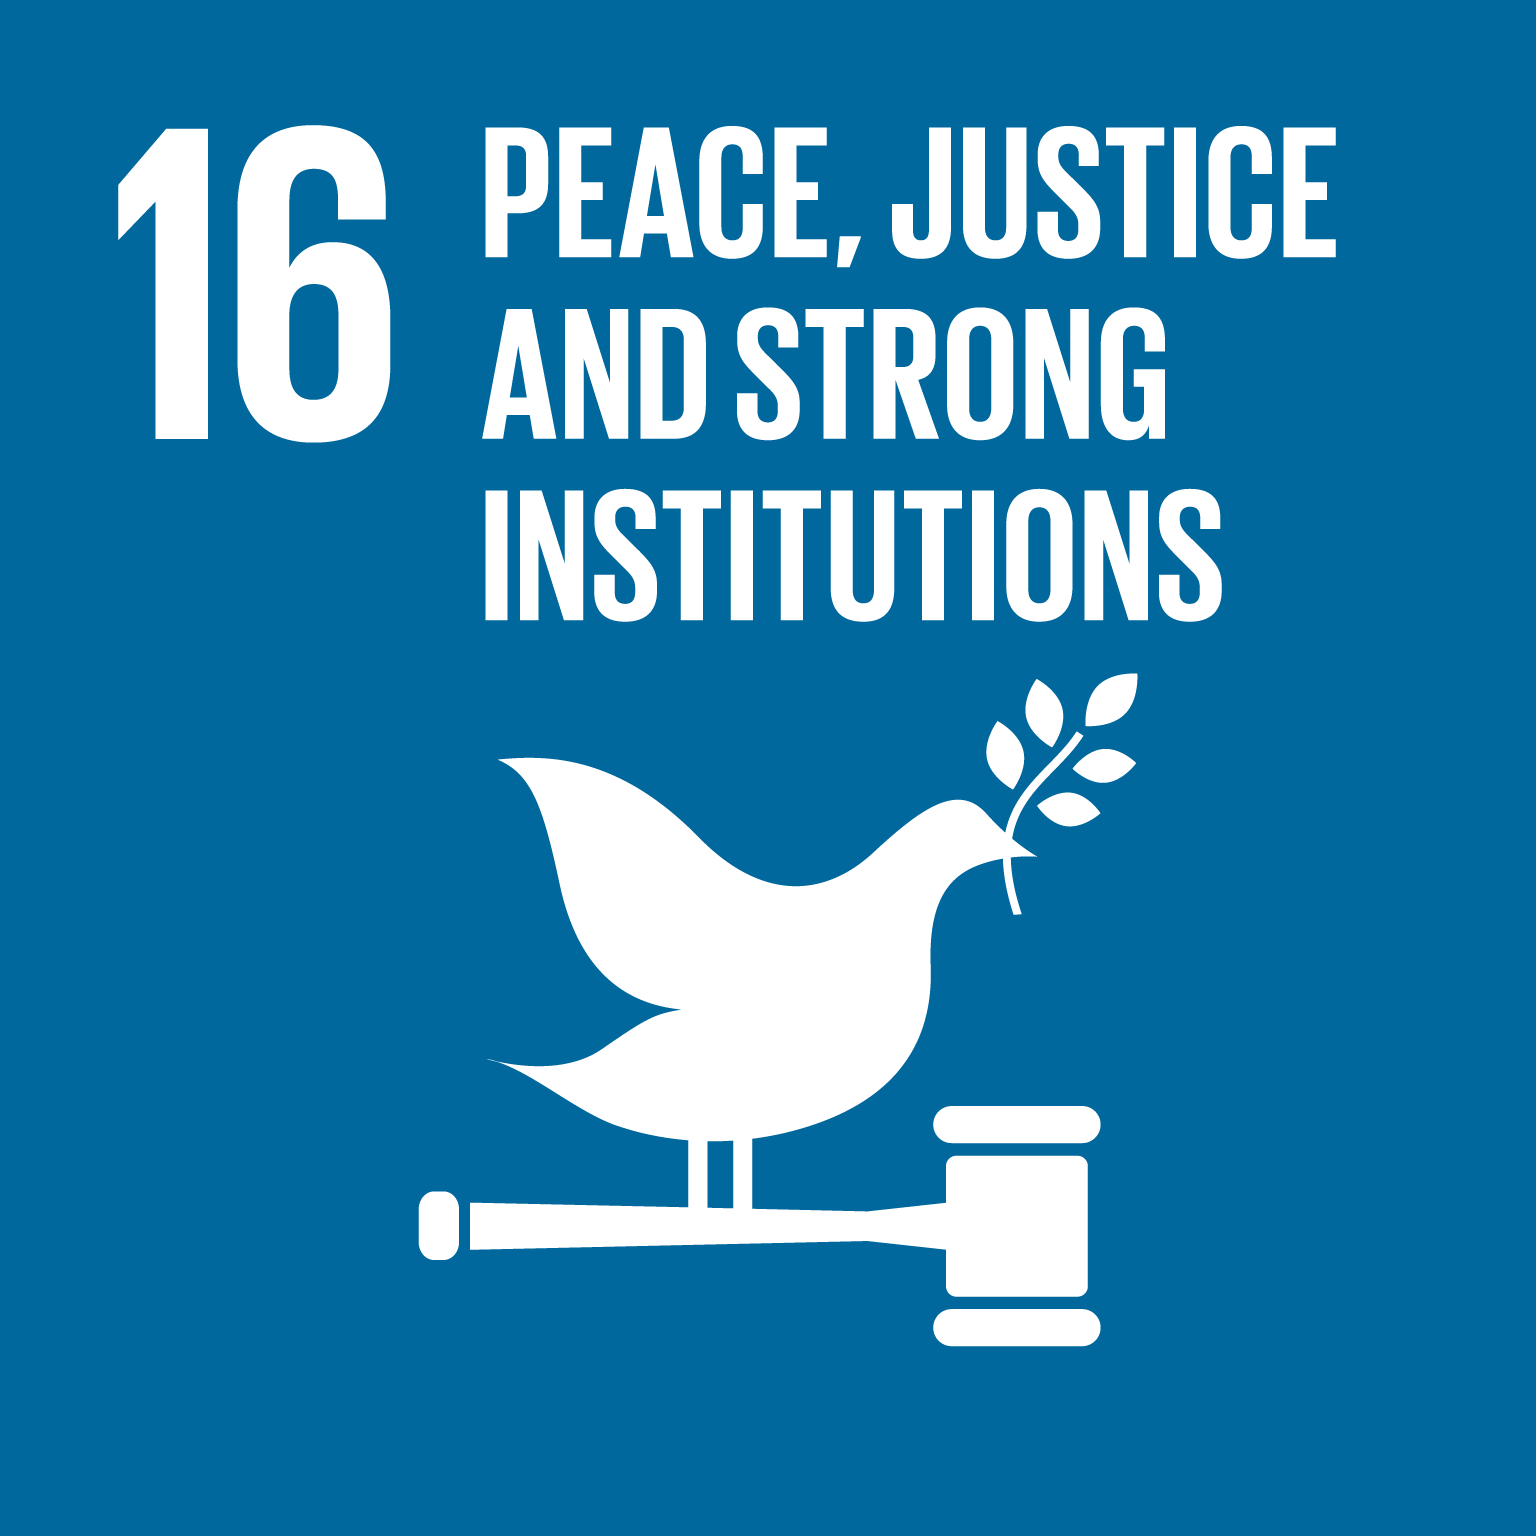 【SDGs logo】PEACE, JUSTICE AND STRONG INSTITUTIONS